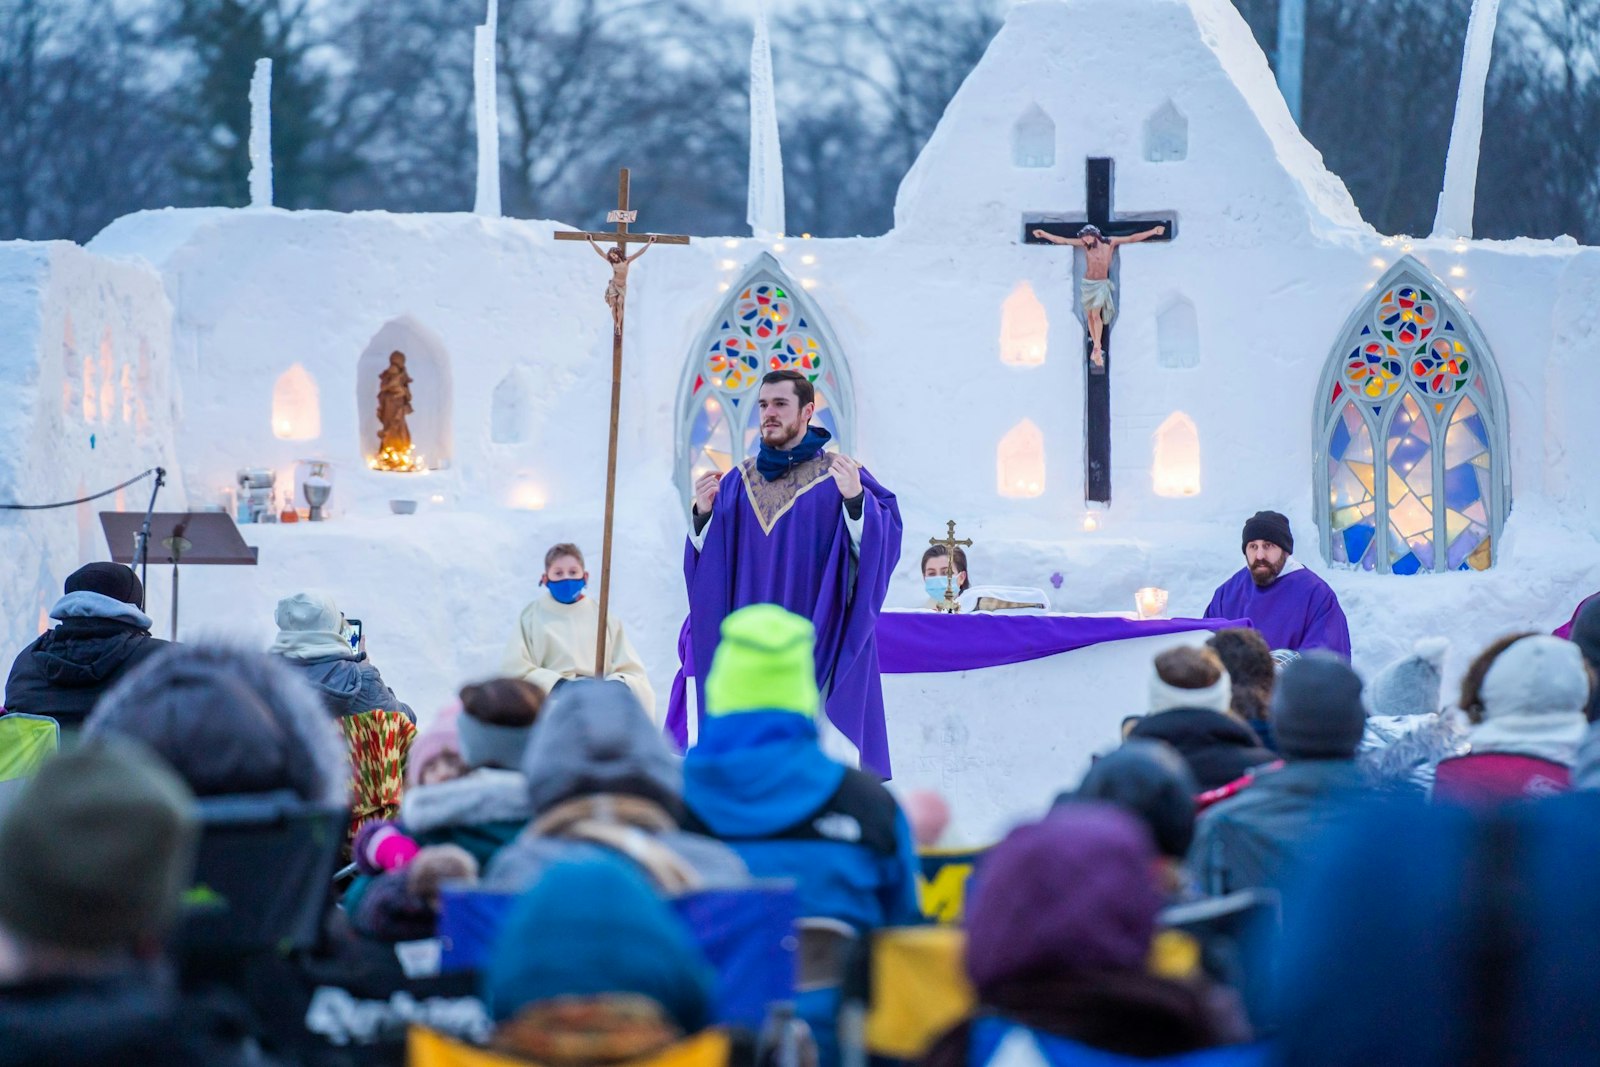 Fr. David Pellican, associate pastor of Divine Child Parish in Dearborn, celebrates Mass on Feb. 21 in a makeshift snow chapel constructed by students and parishioners after a historic snowfall. Fr. Pellican said the chapel took a week to construct, with students doing the heavy lifting and parishioners donating items such as statuary and candles for a special outdoor liturgy. (Valaurian Waller | Detroit Catholic)